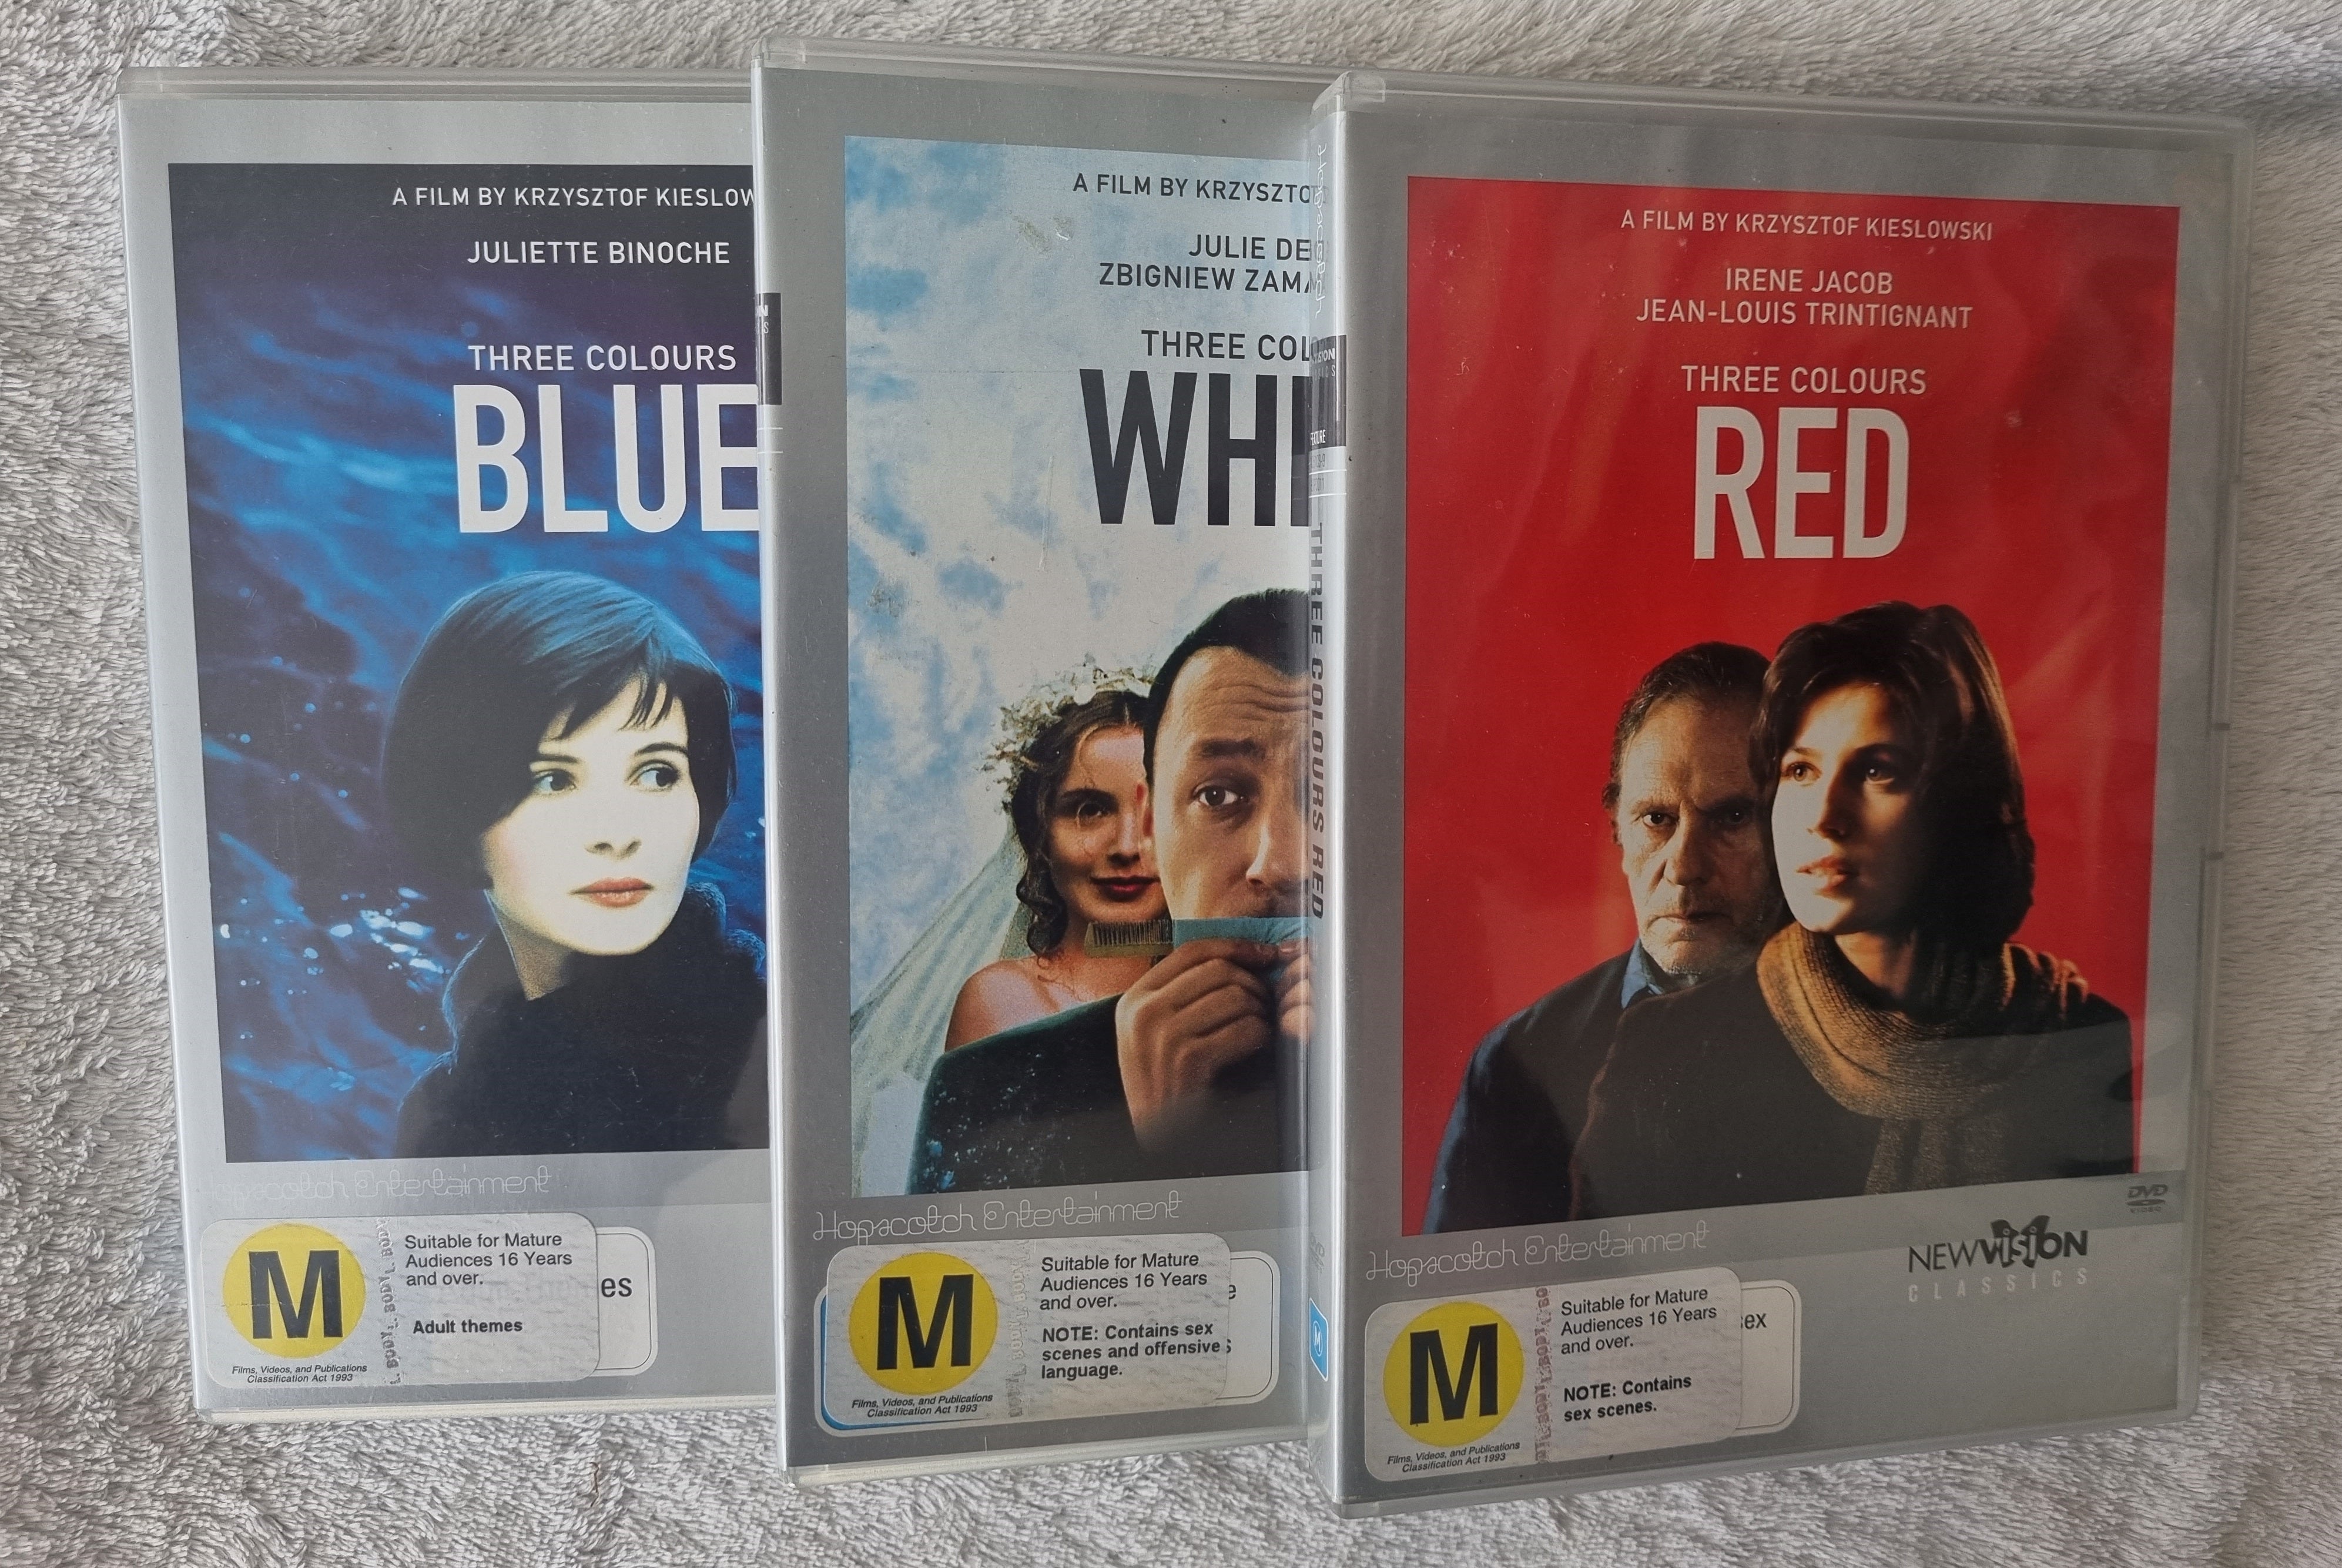 Three Colours Trilogy (Red, White Blue)